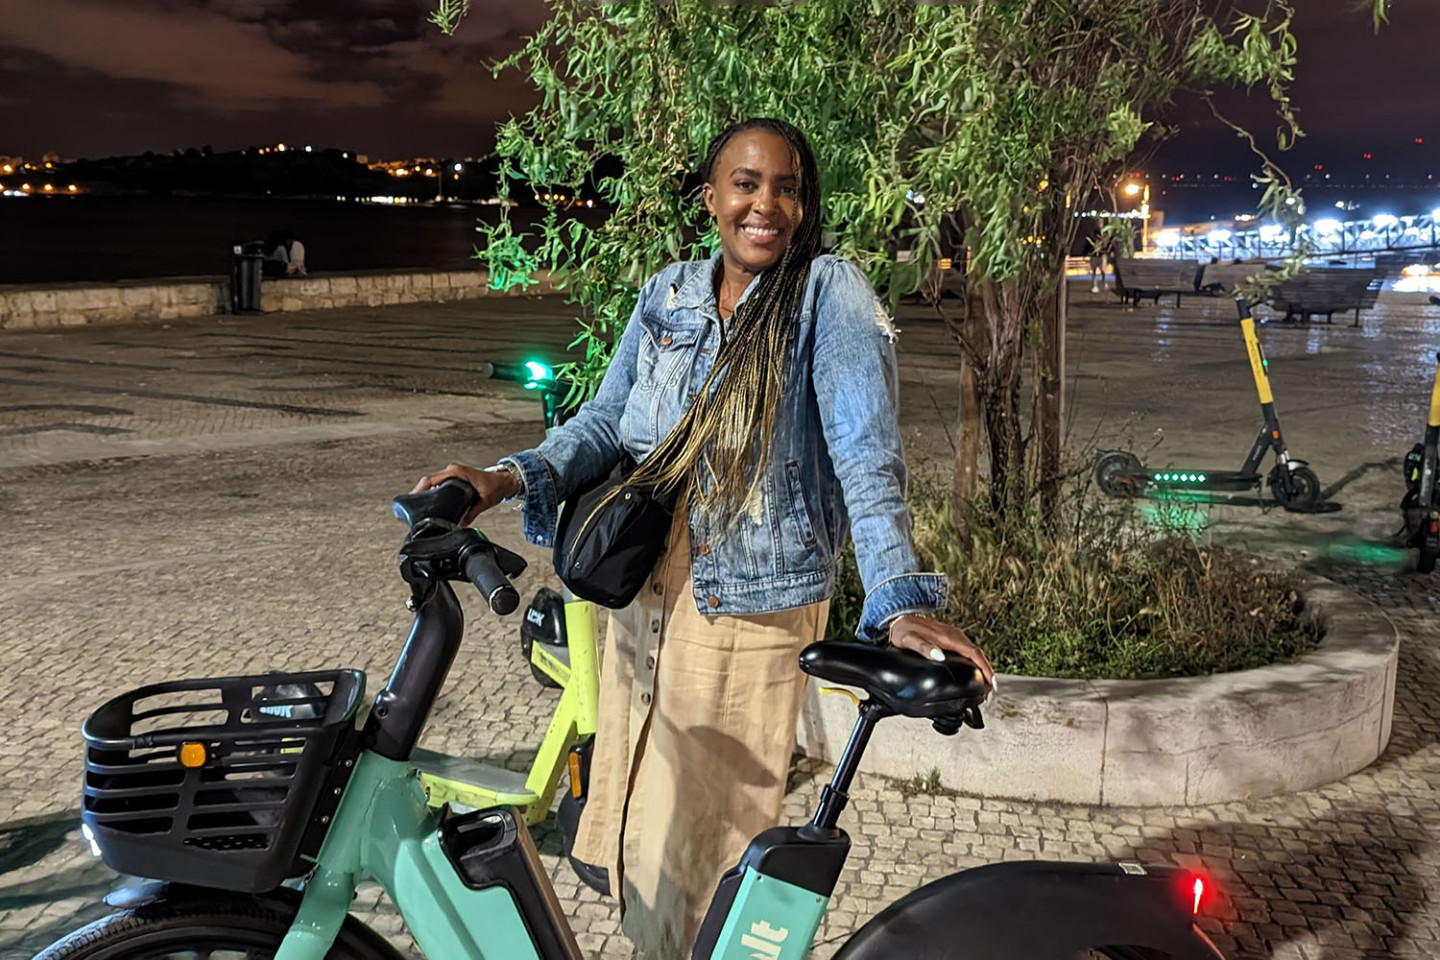 Syreeta Williams in Portugal, shown outside at night standing beside an electric bike